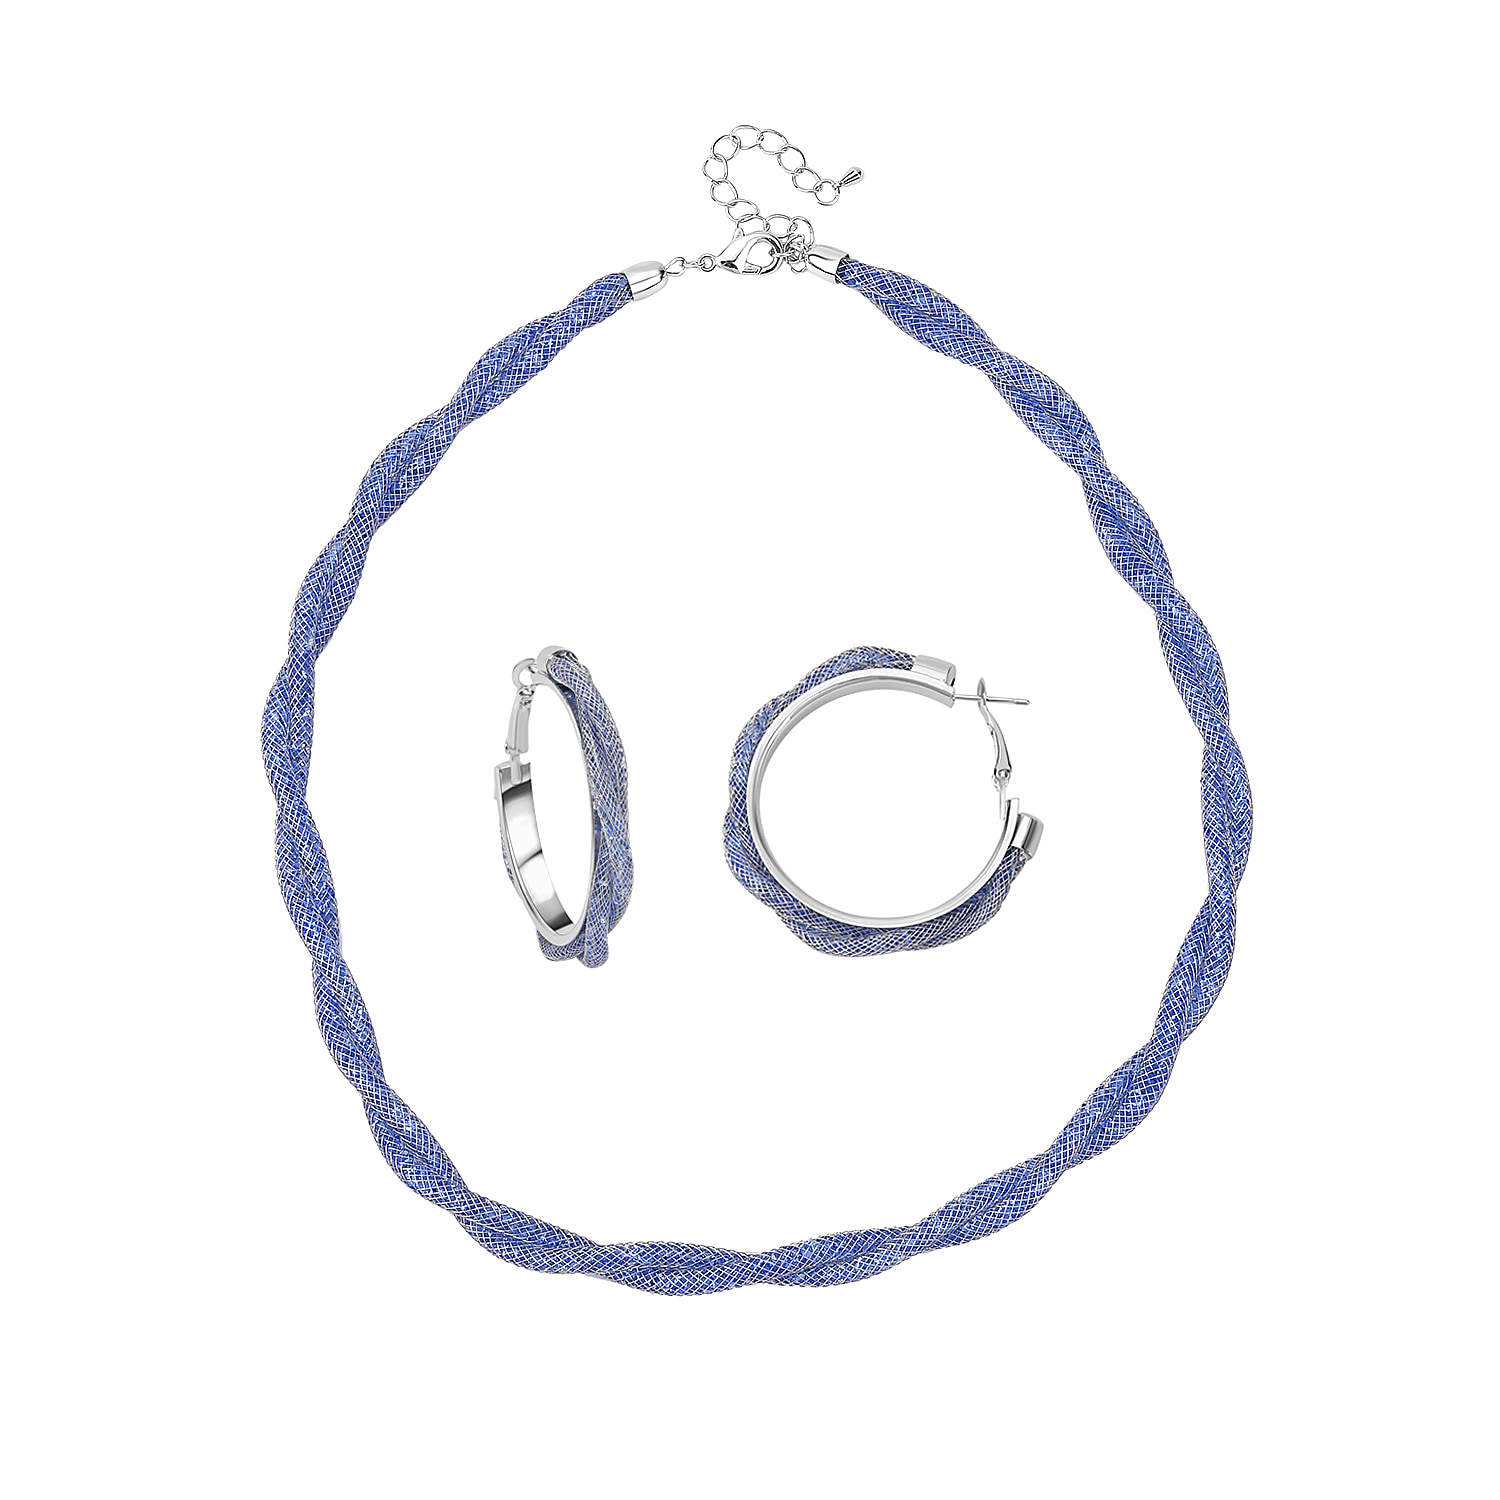 One Time Closeout - 2 Piece Set - Blue Austrian Tuscan Croche Hoop Earrings and Necklace (Size 20-2 Ext)